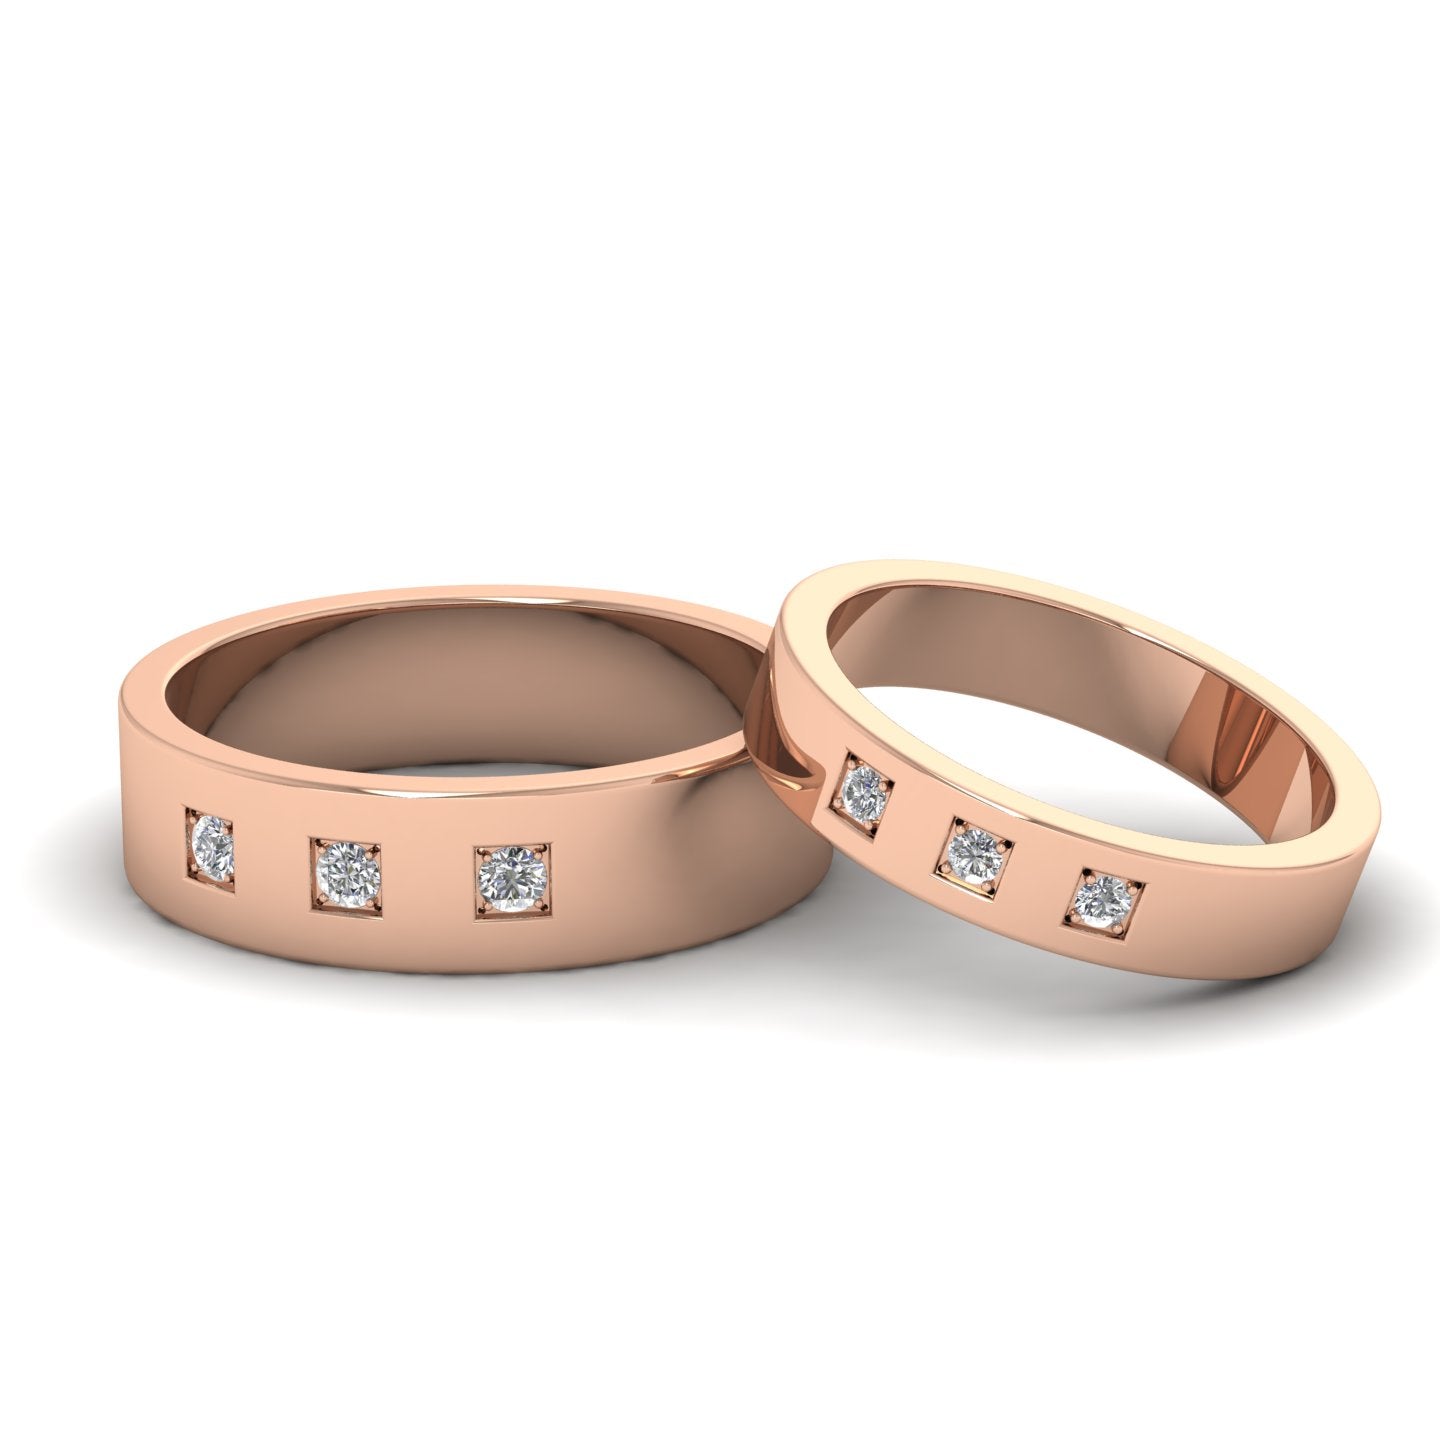 Three Diamonds With Square Setting 18ct Rose Gold 4mm Wedding Ring